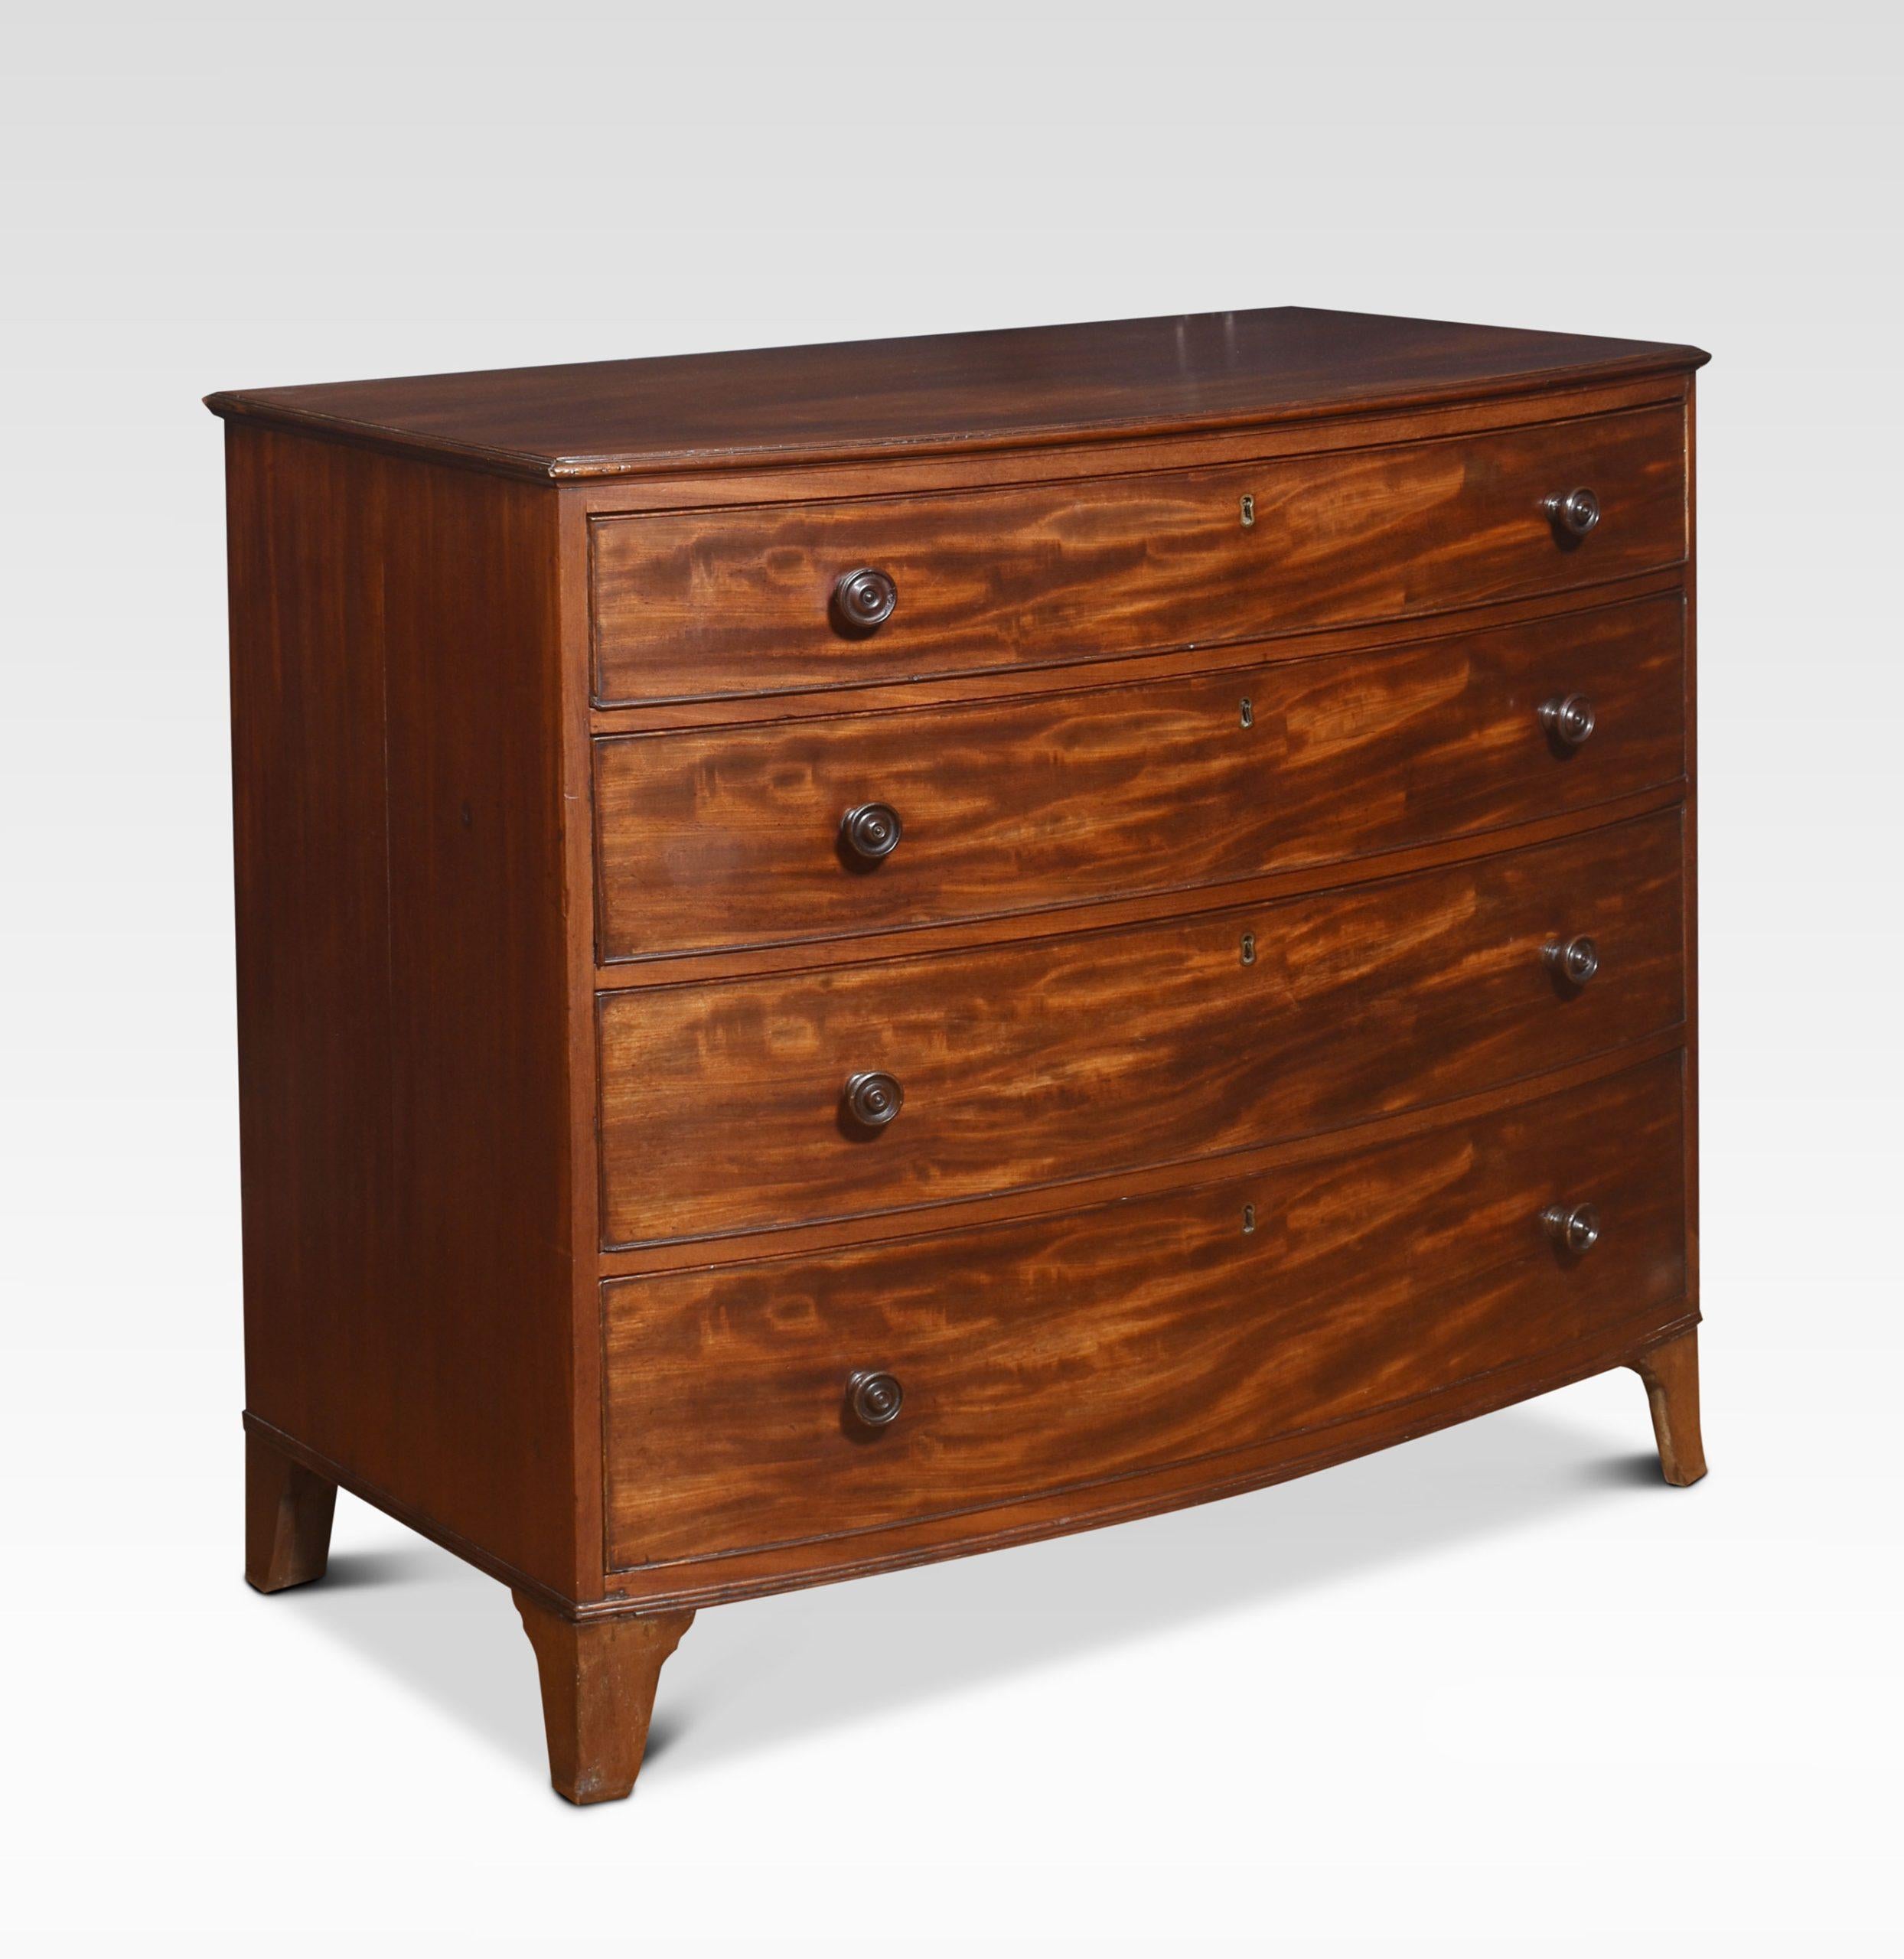 Regency mahogany bow fronted chest of drawers almost certanly Gillows. The shapedn well figured mahogany top with moulded edge, above four long graduated drawers with turned wooden handles and solid oak draw liners. All raised up on splayed